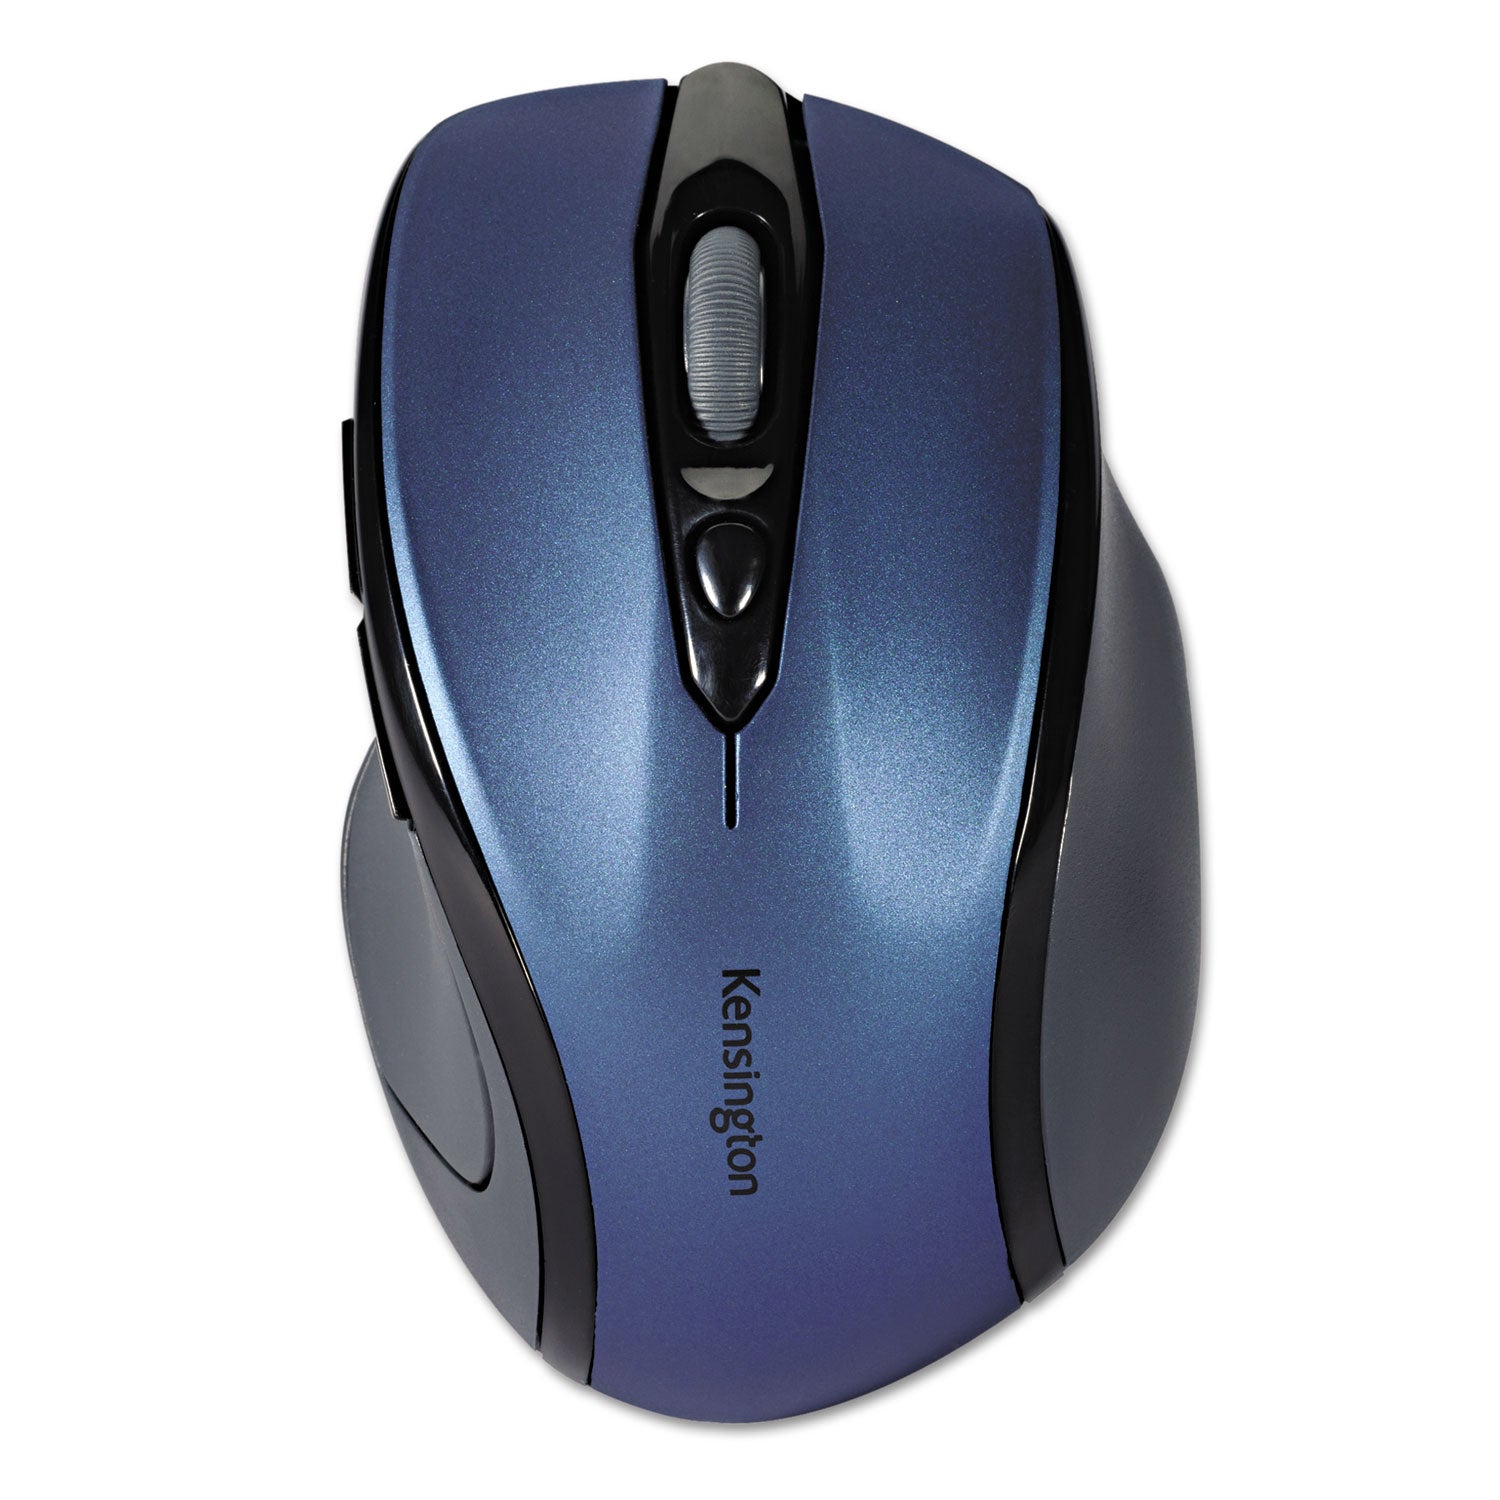 Pro Fit Mid-Size Wireless Mouse, 2.4 GHz Frequency/30 ft Wireless Range, Right Hand Use, Sapphire Blue - 